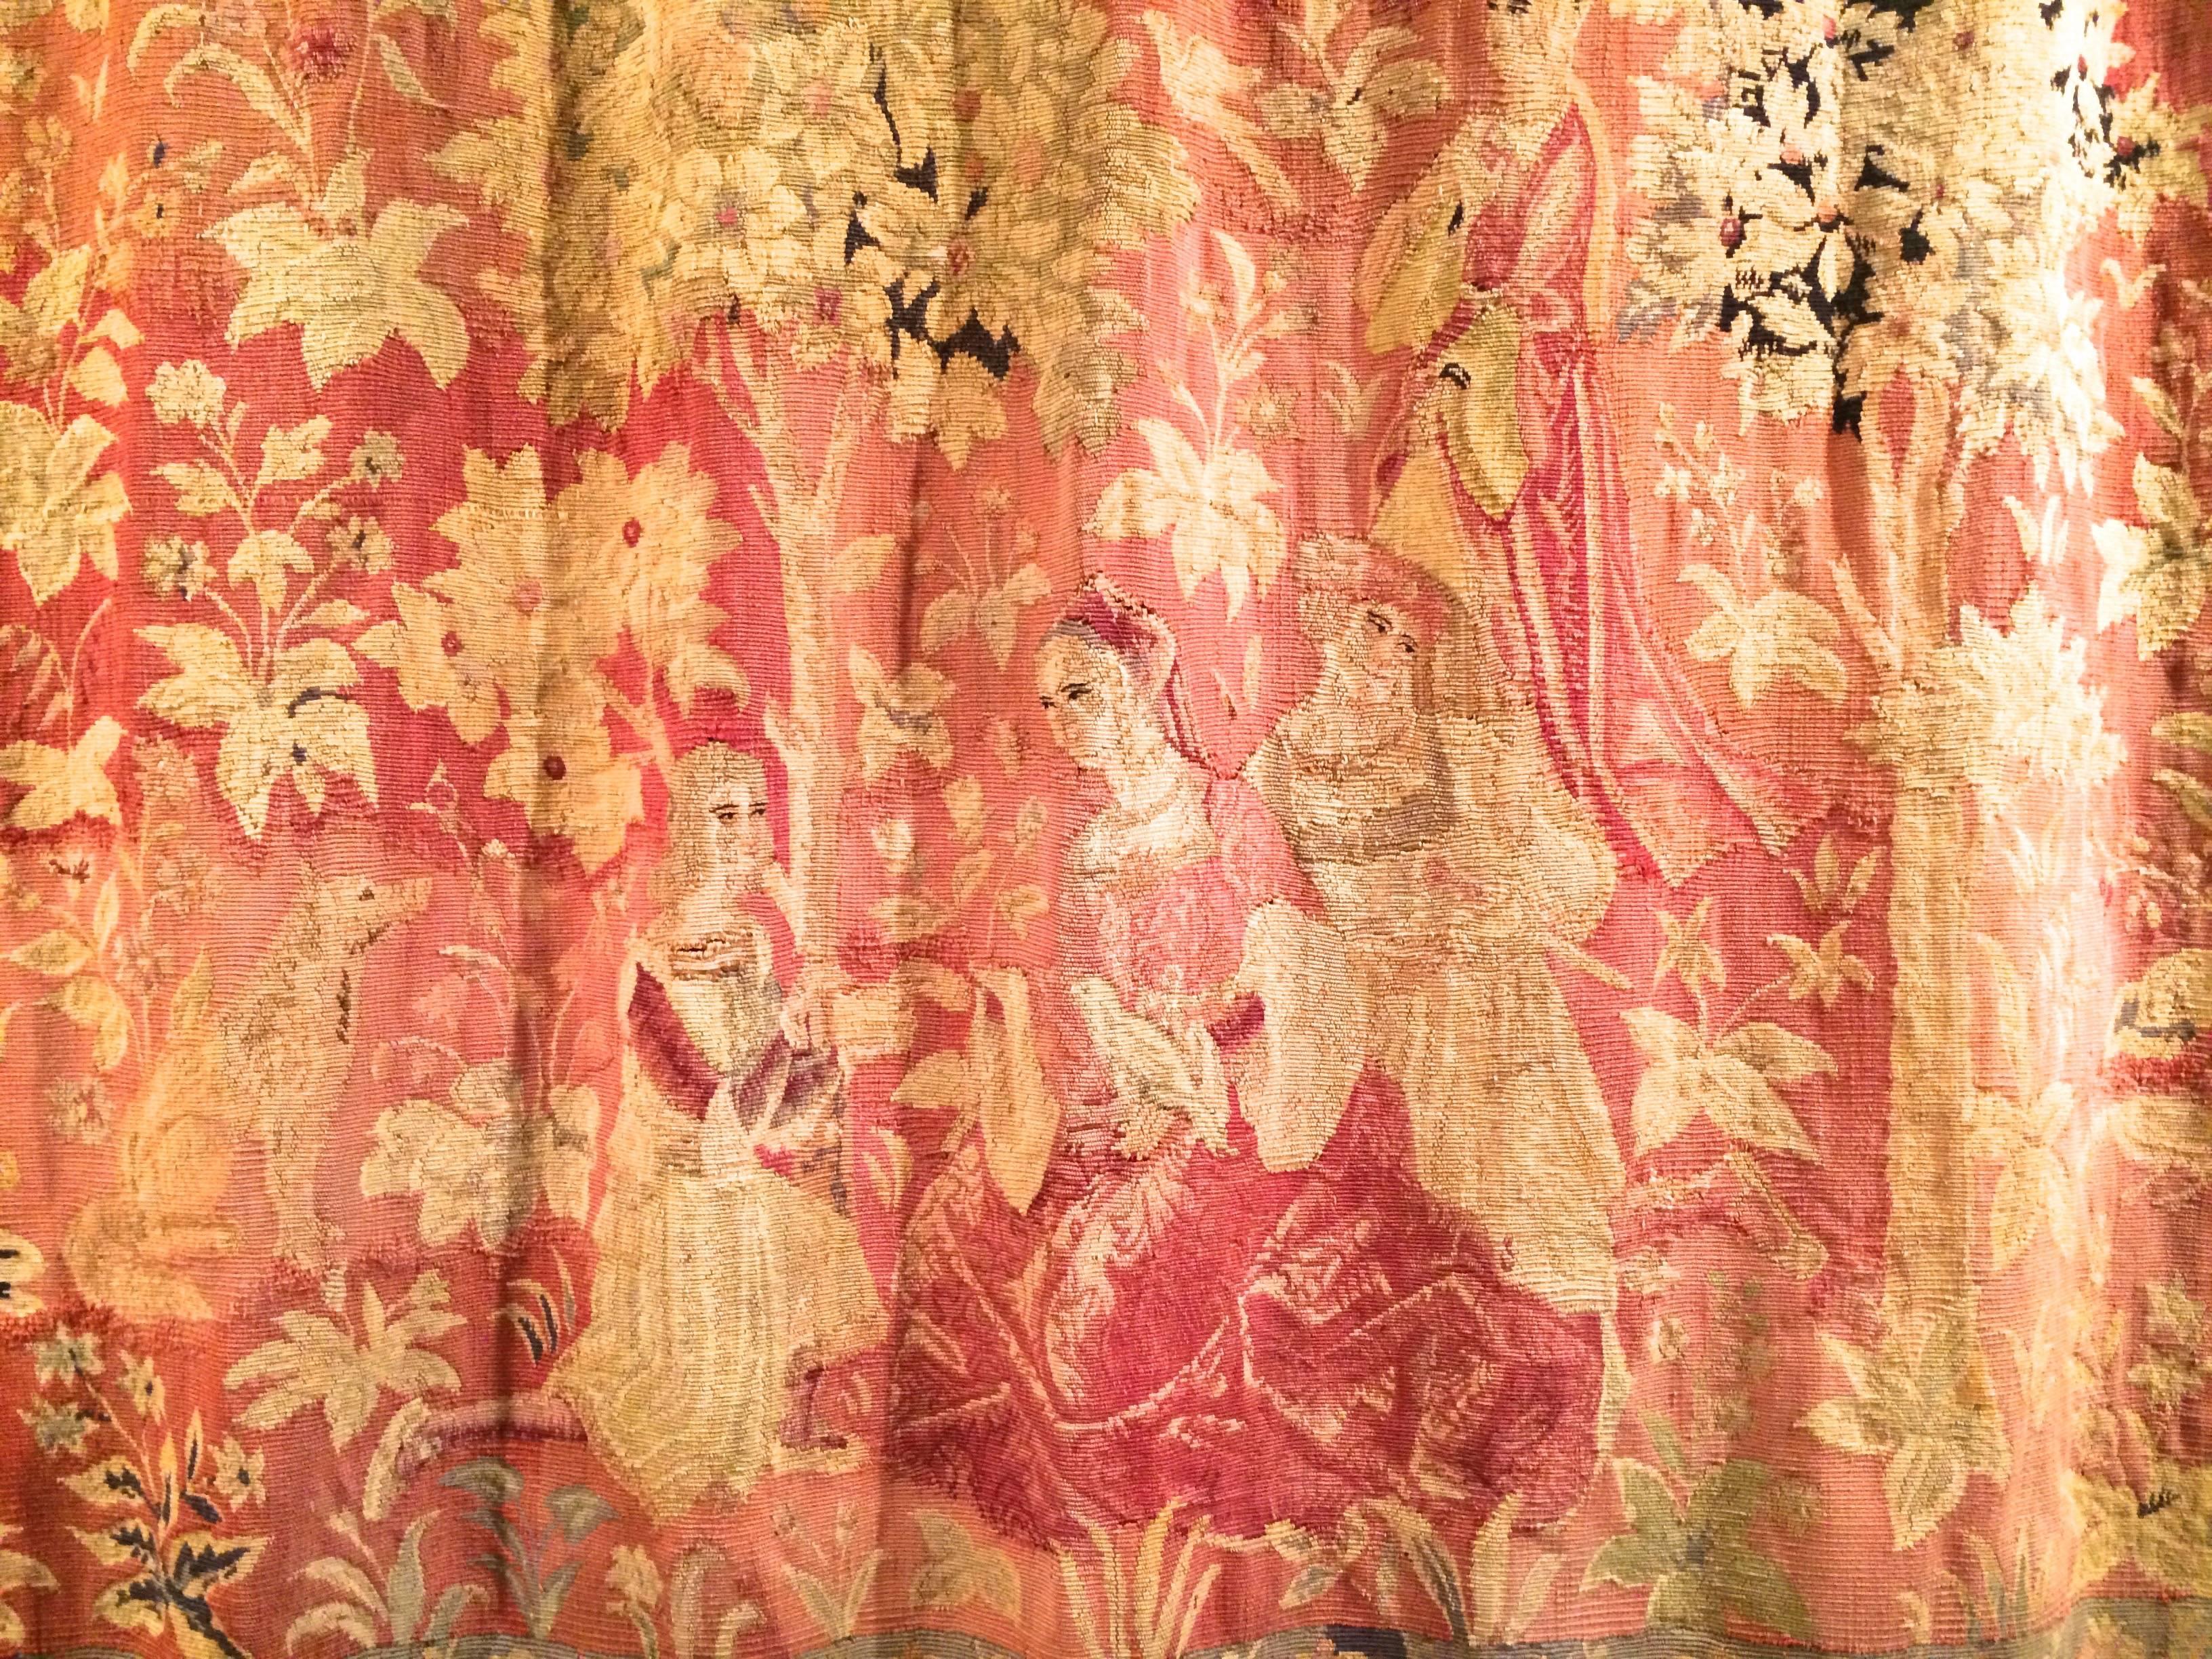 Beautiful hand woven wool tapestry possibly Flemish around 1860-70's. Depicting yang man kneeling in front of a woman offering a gift or engagement ring, very romantic and happy scene. Some small restoration, but overall very good condition.